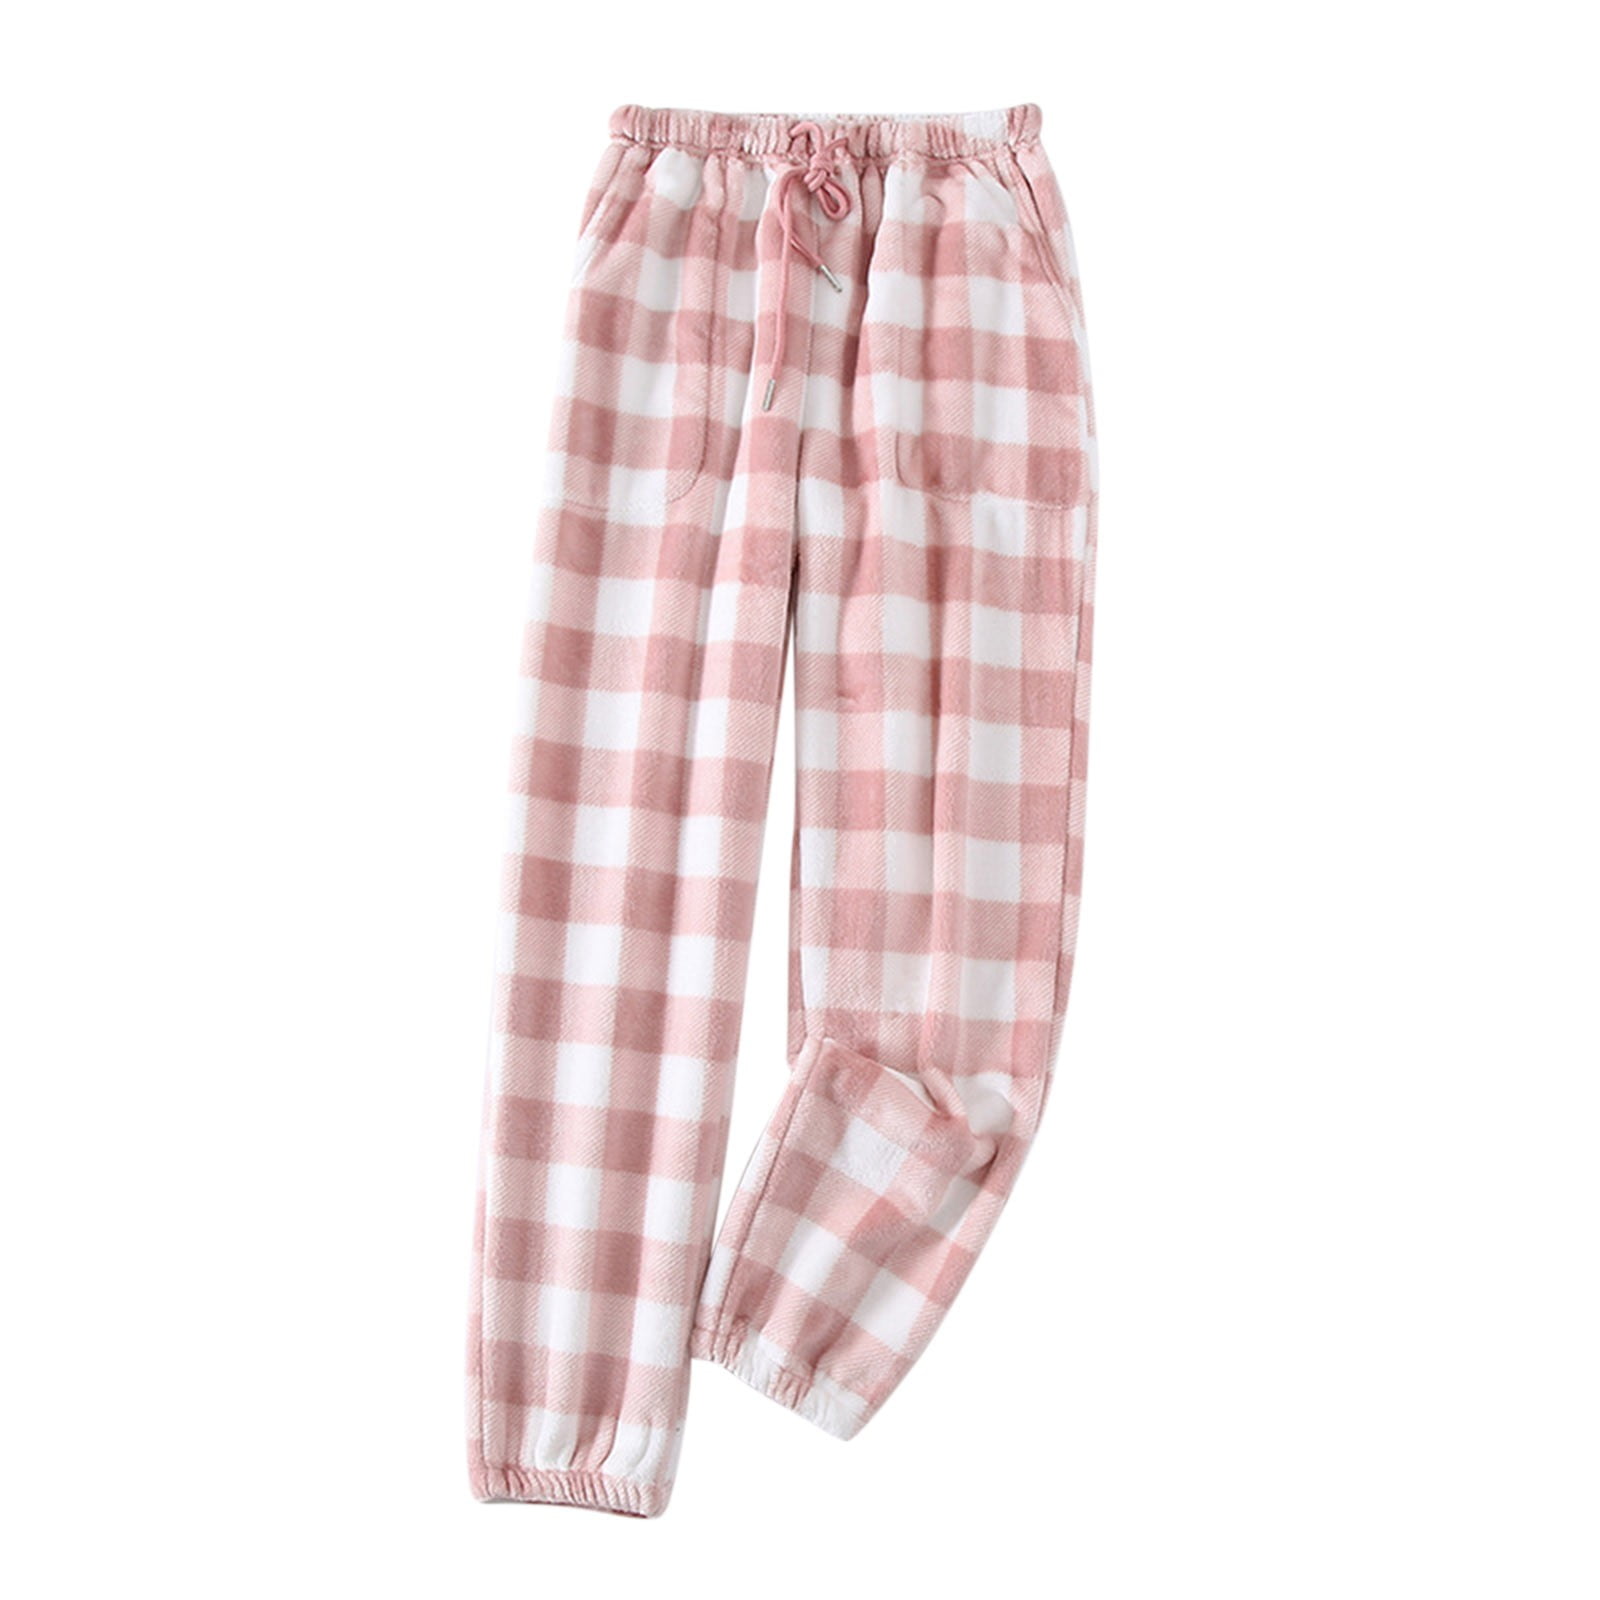 xiuh casual pants women's casual pajama checkered with pockets pants ...